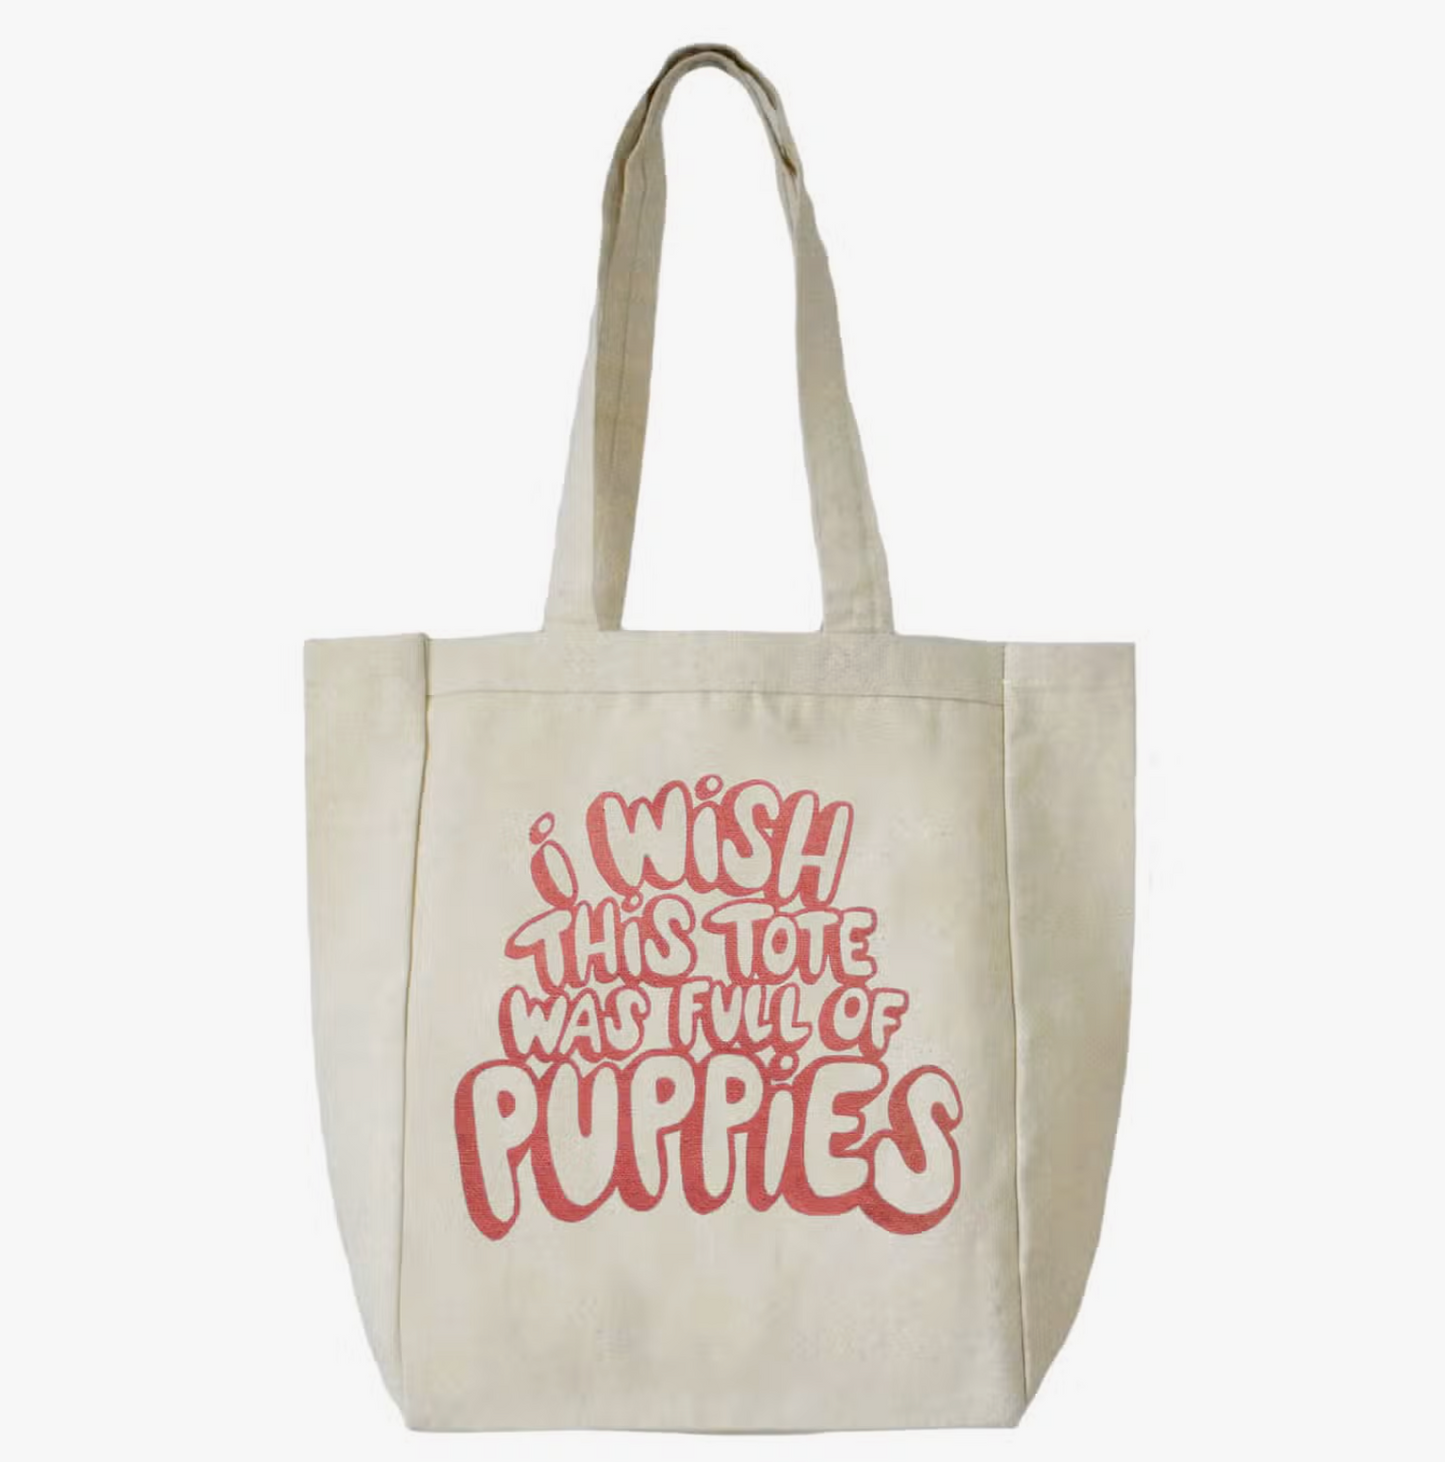 I Wish This Tote Was Full Of Puppies Tote Bag